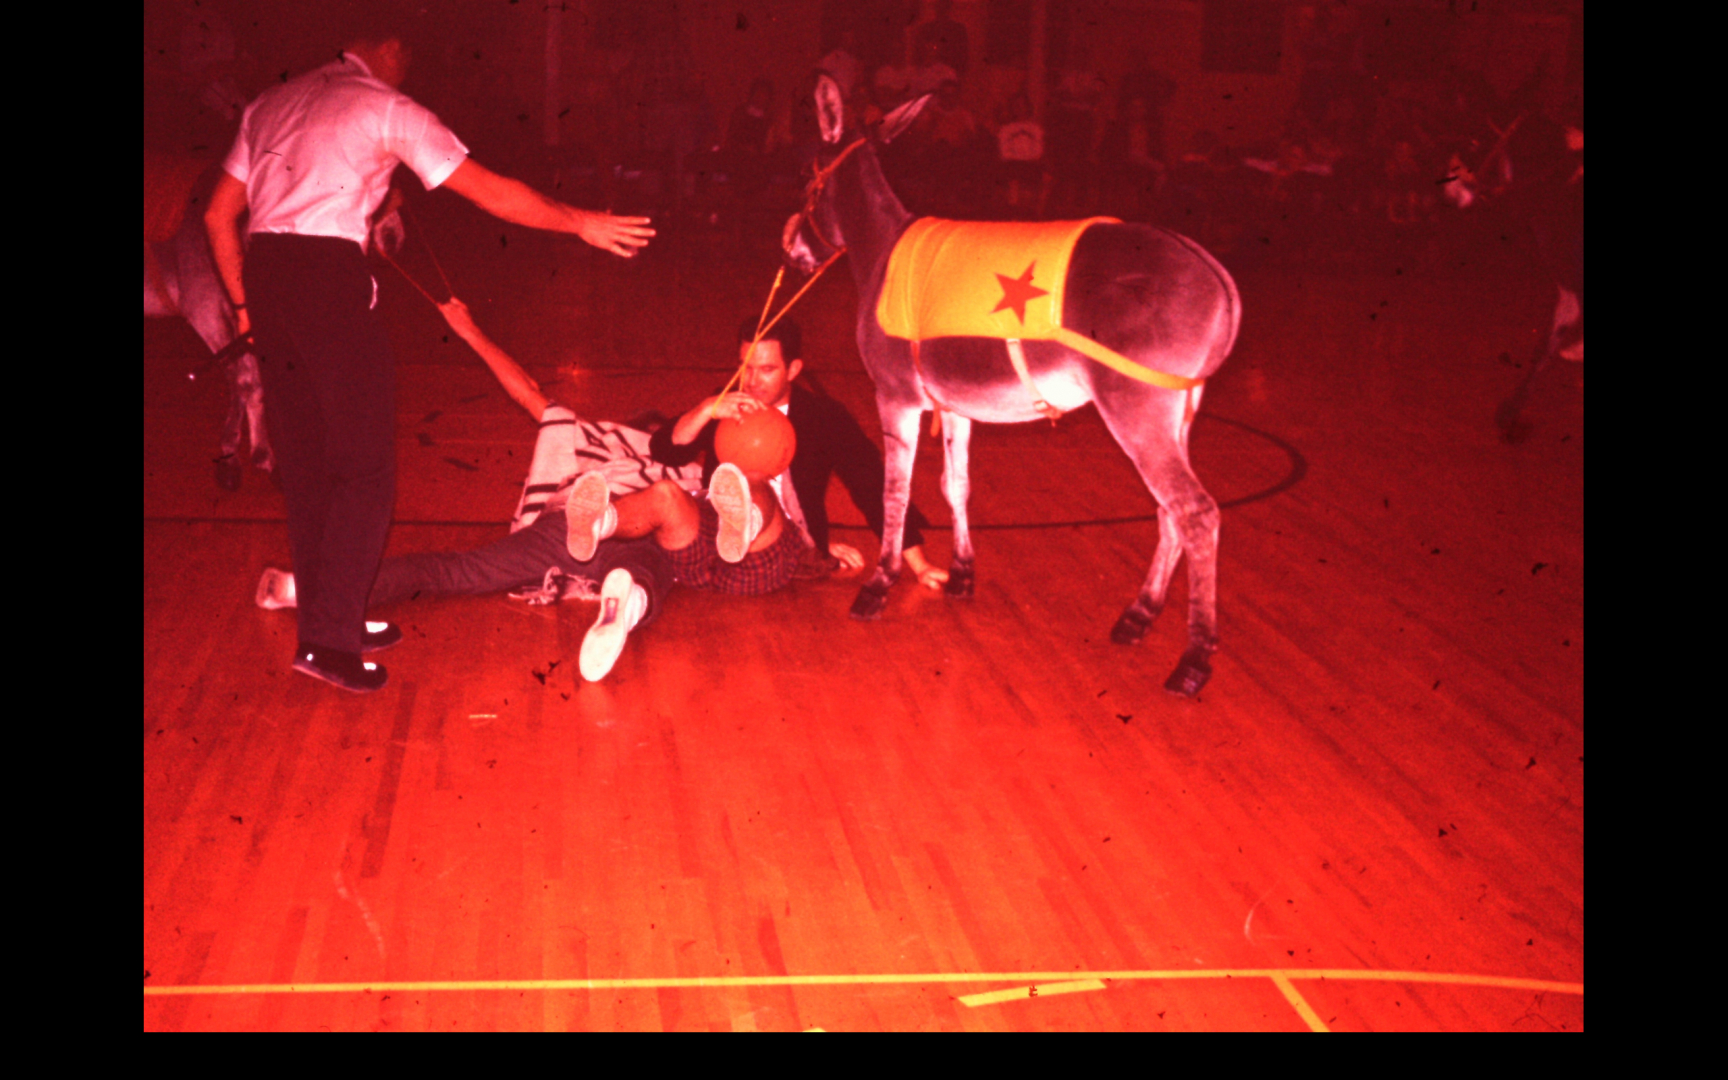 Donkey basketball in the gym.